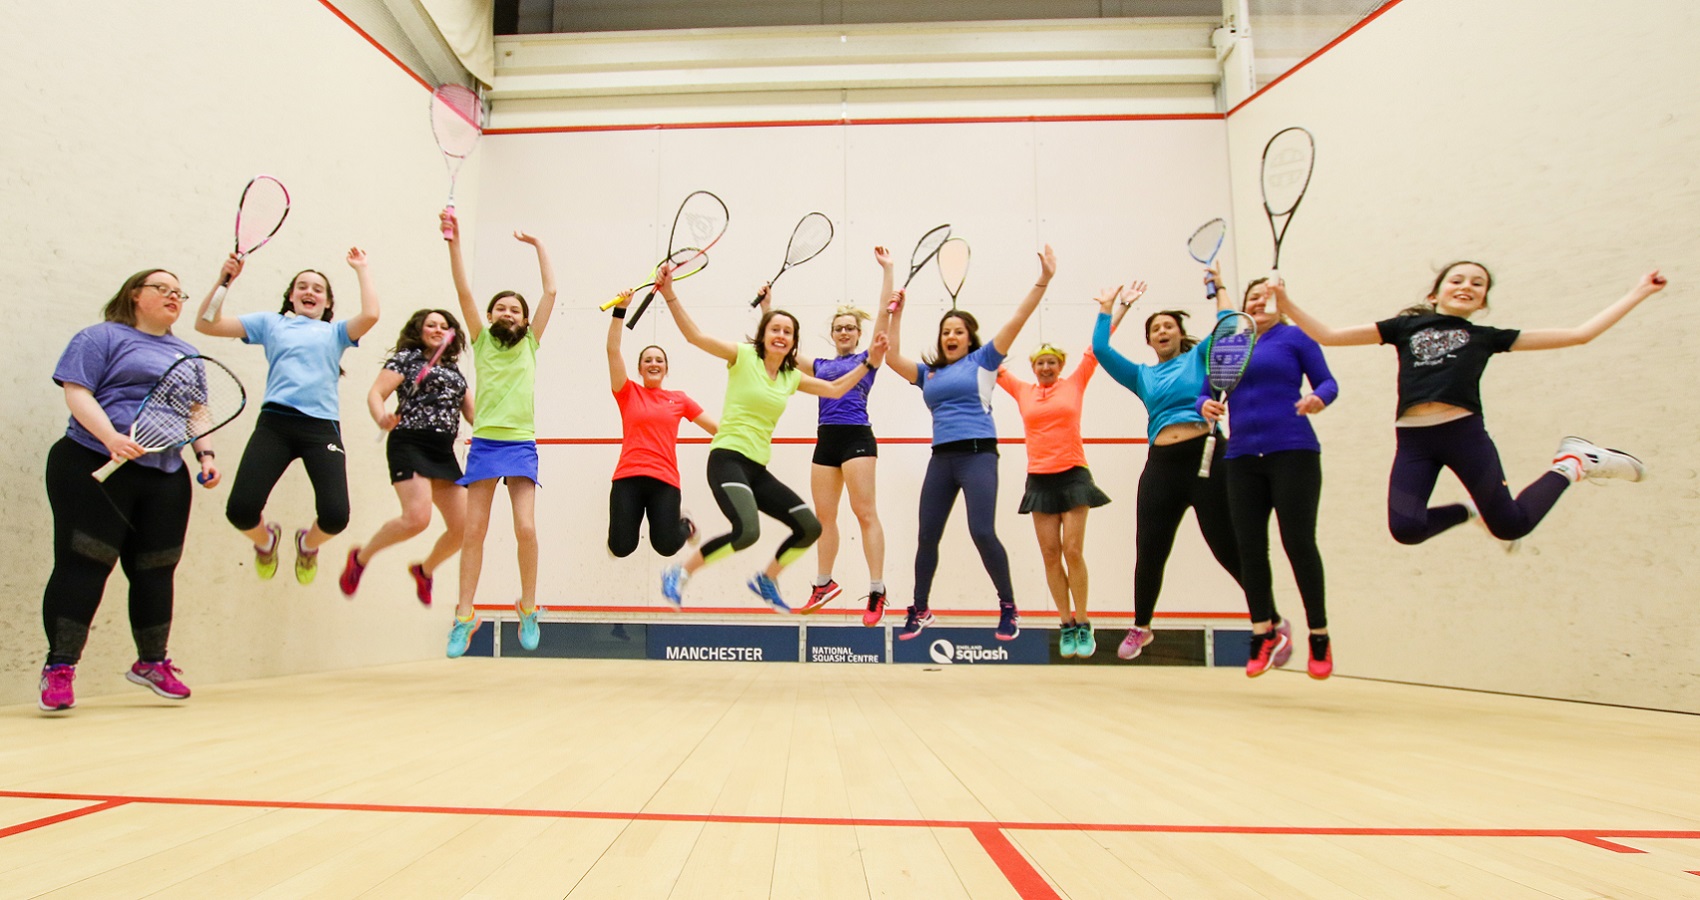 Group of female squash players jumping in the air